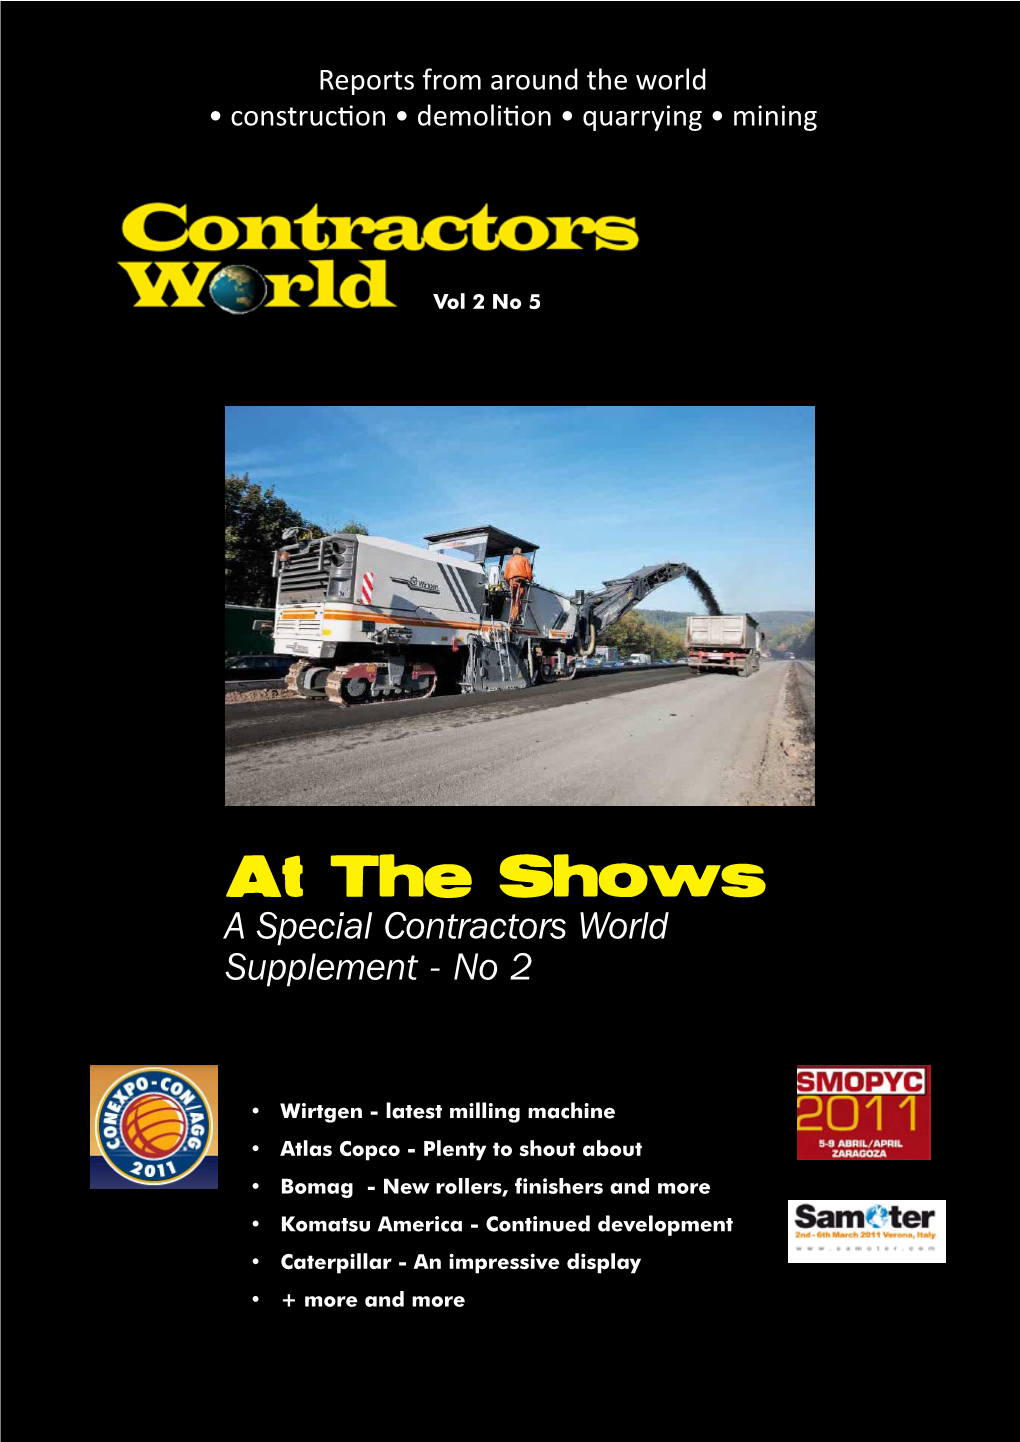 At the Shows a Special Contractors World Supplement - No 2